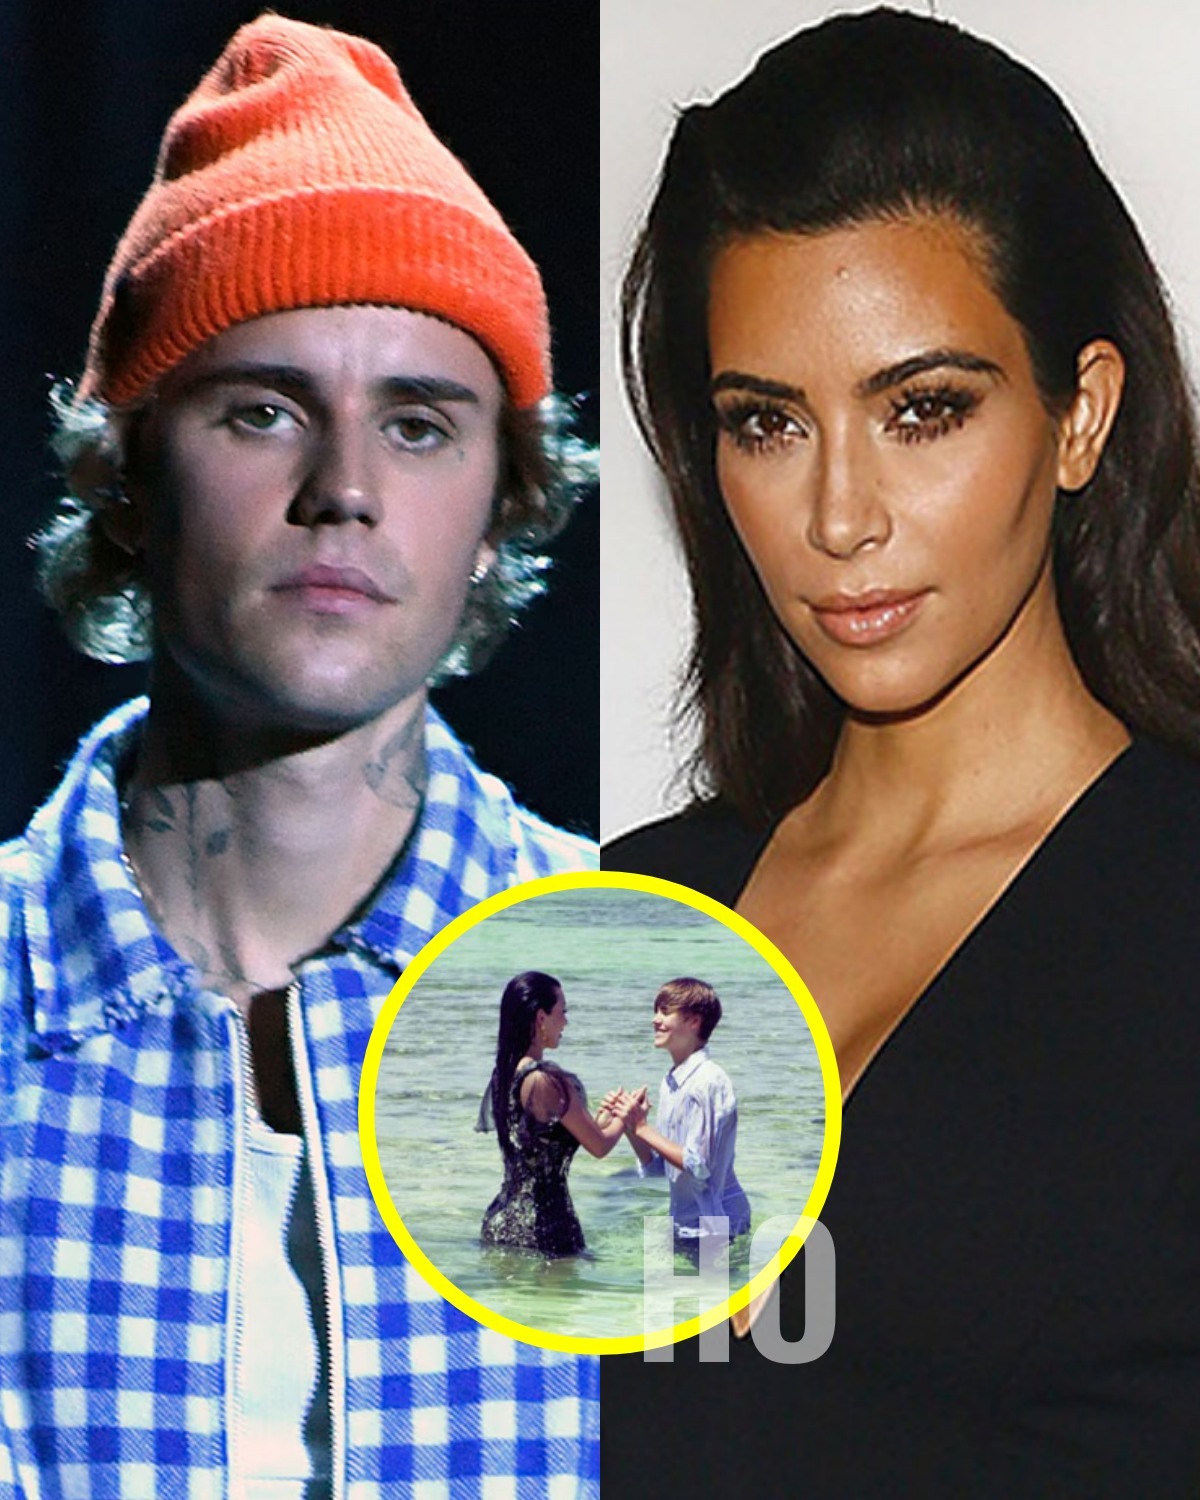 Kim K FREAKS OUT After Justin Bieber Said She Did Worse Than What Diddy Did To Him